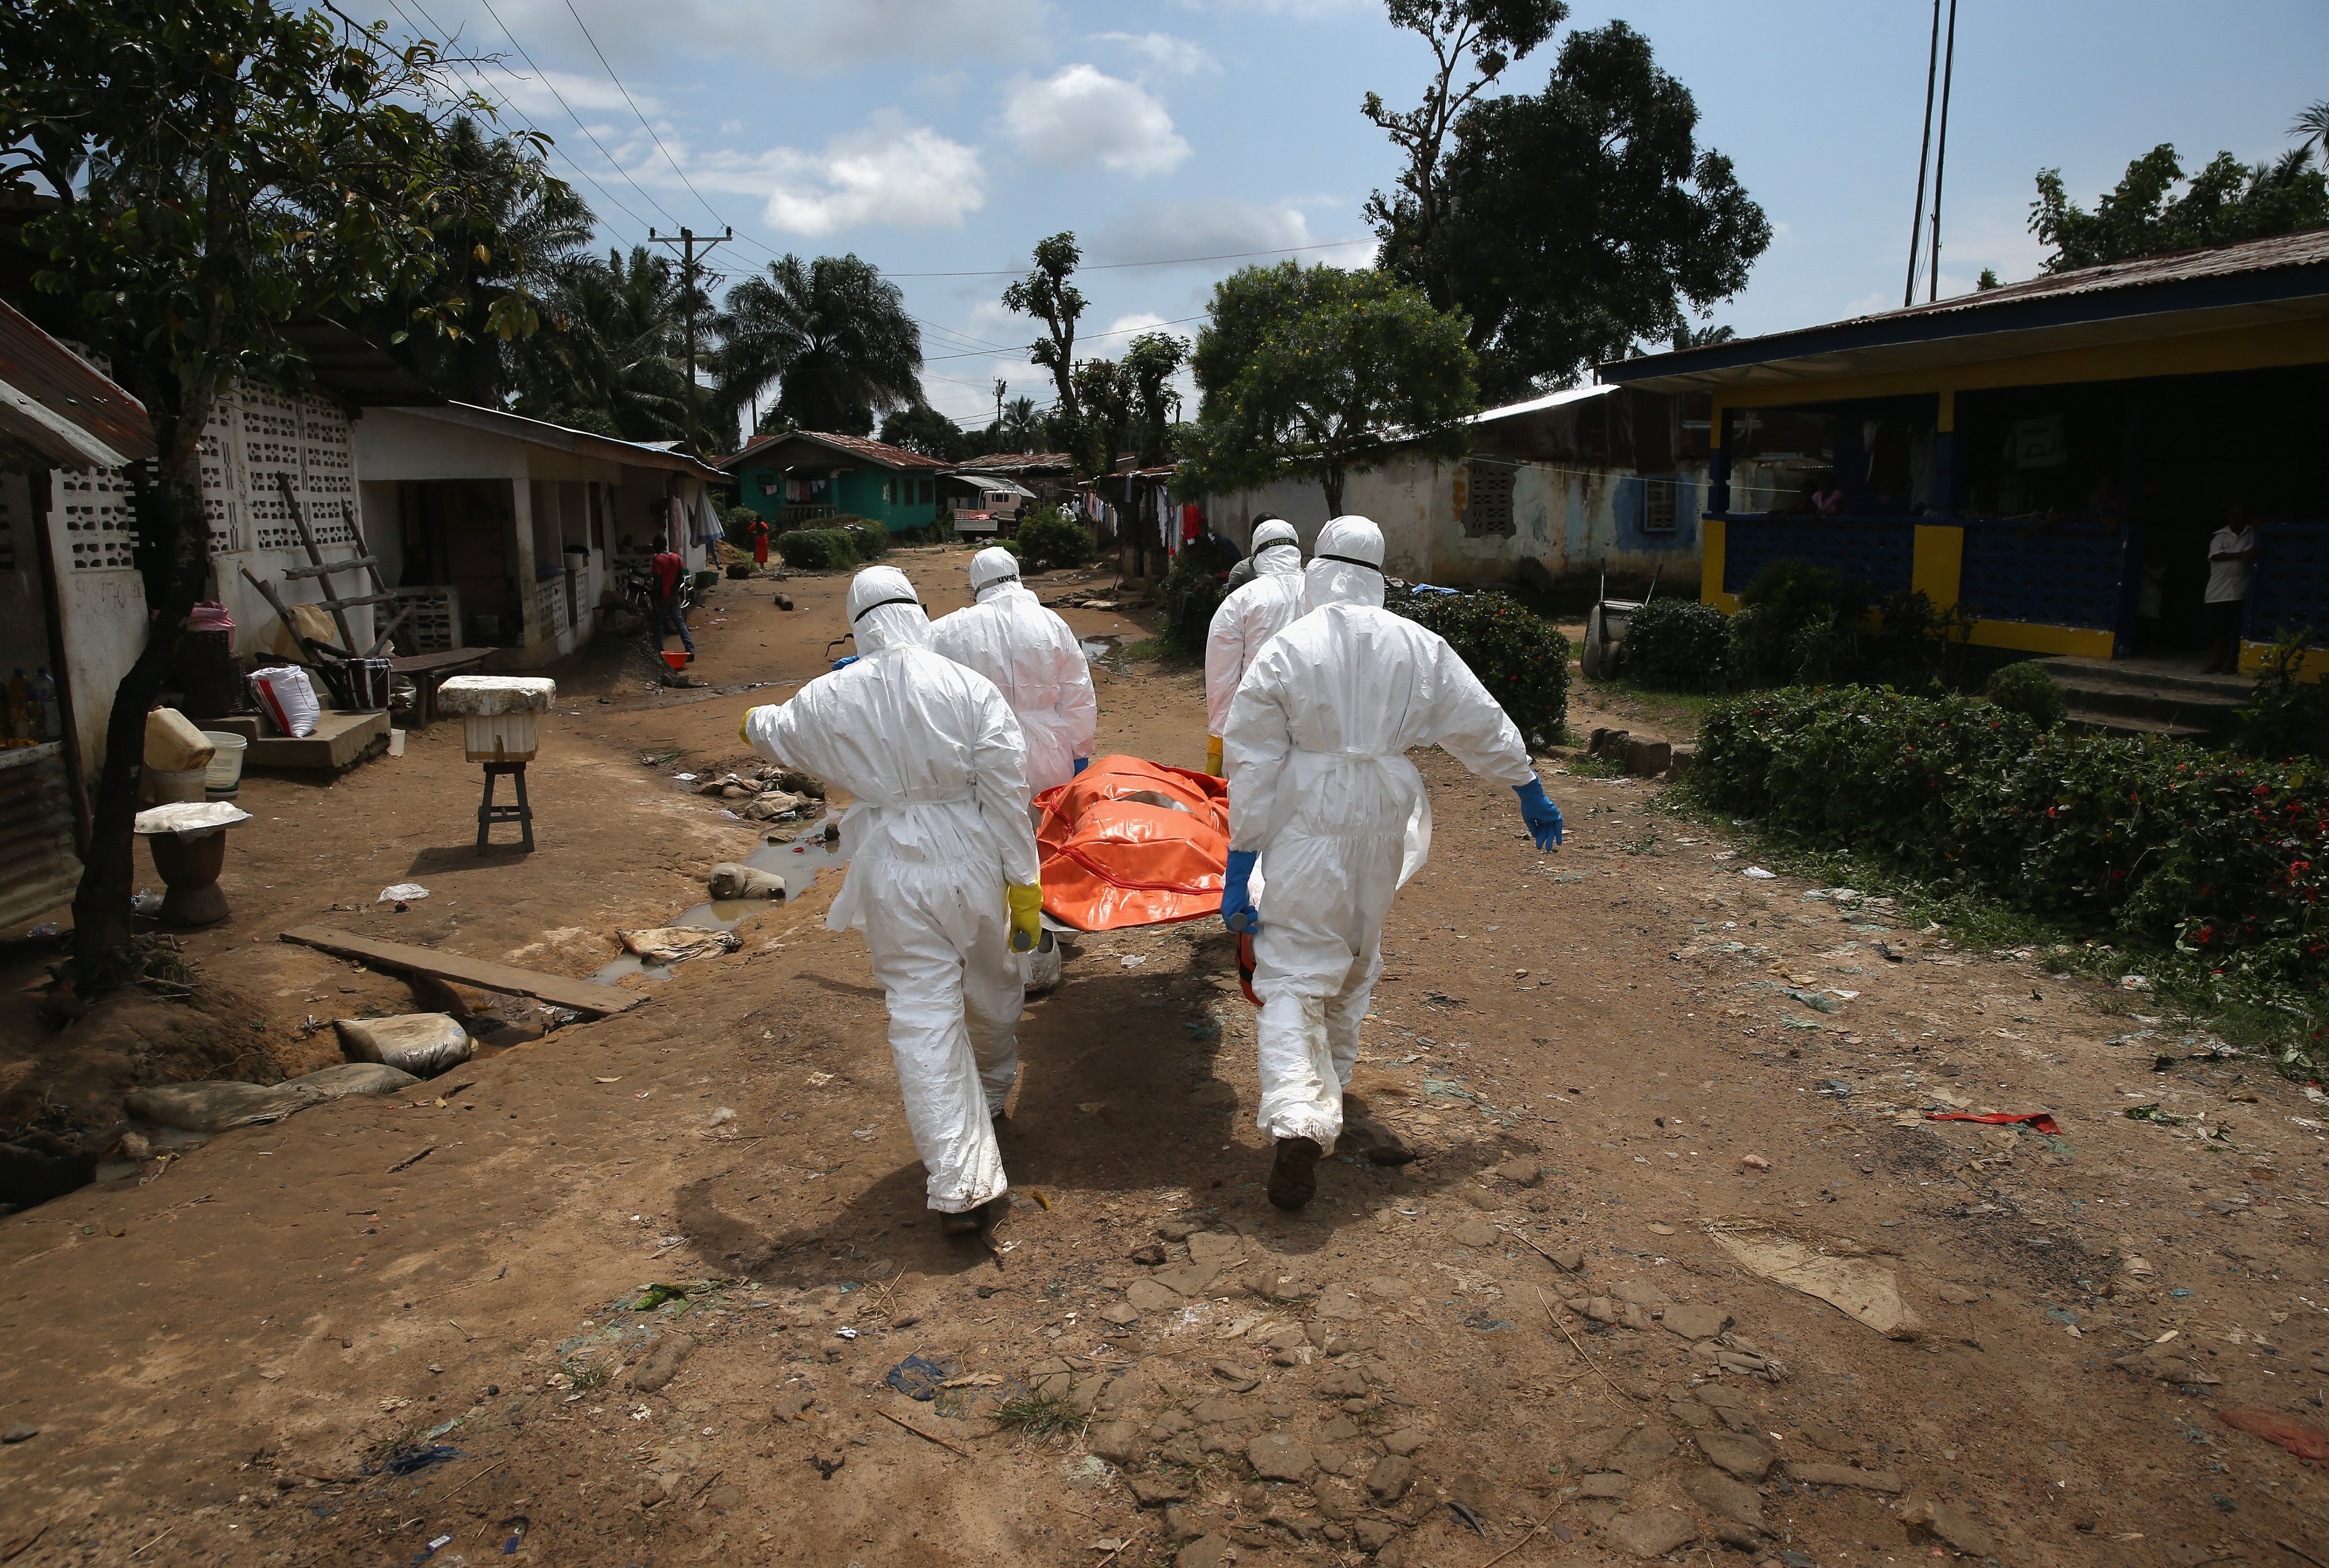 An Ebola burial team carries the body of a woman through the New Kru Town suburb on Oct. 10, 2014 of Monrovia, Liberia. (John Moore—Getty Images)